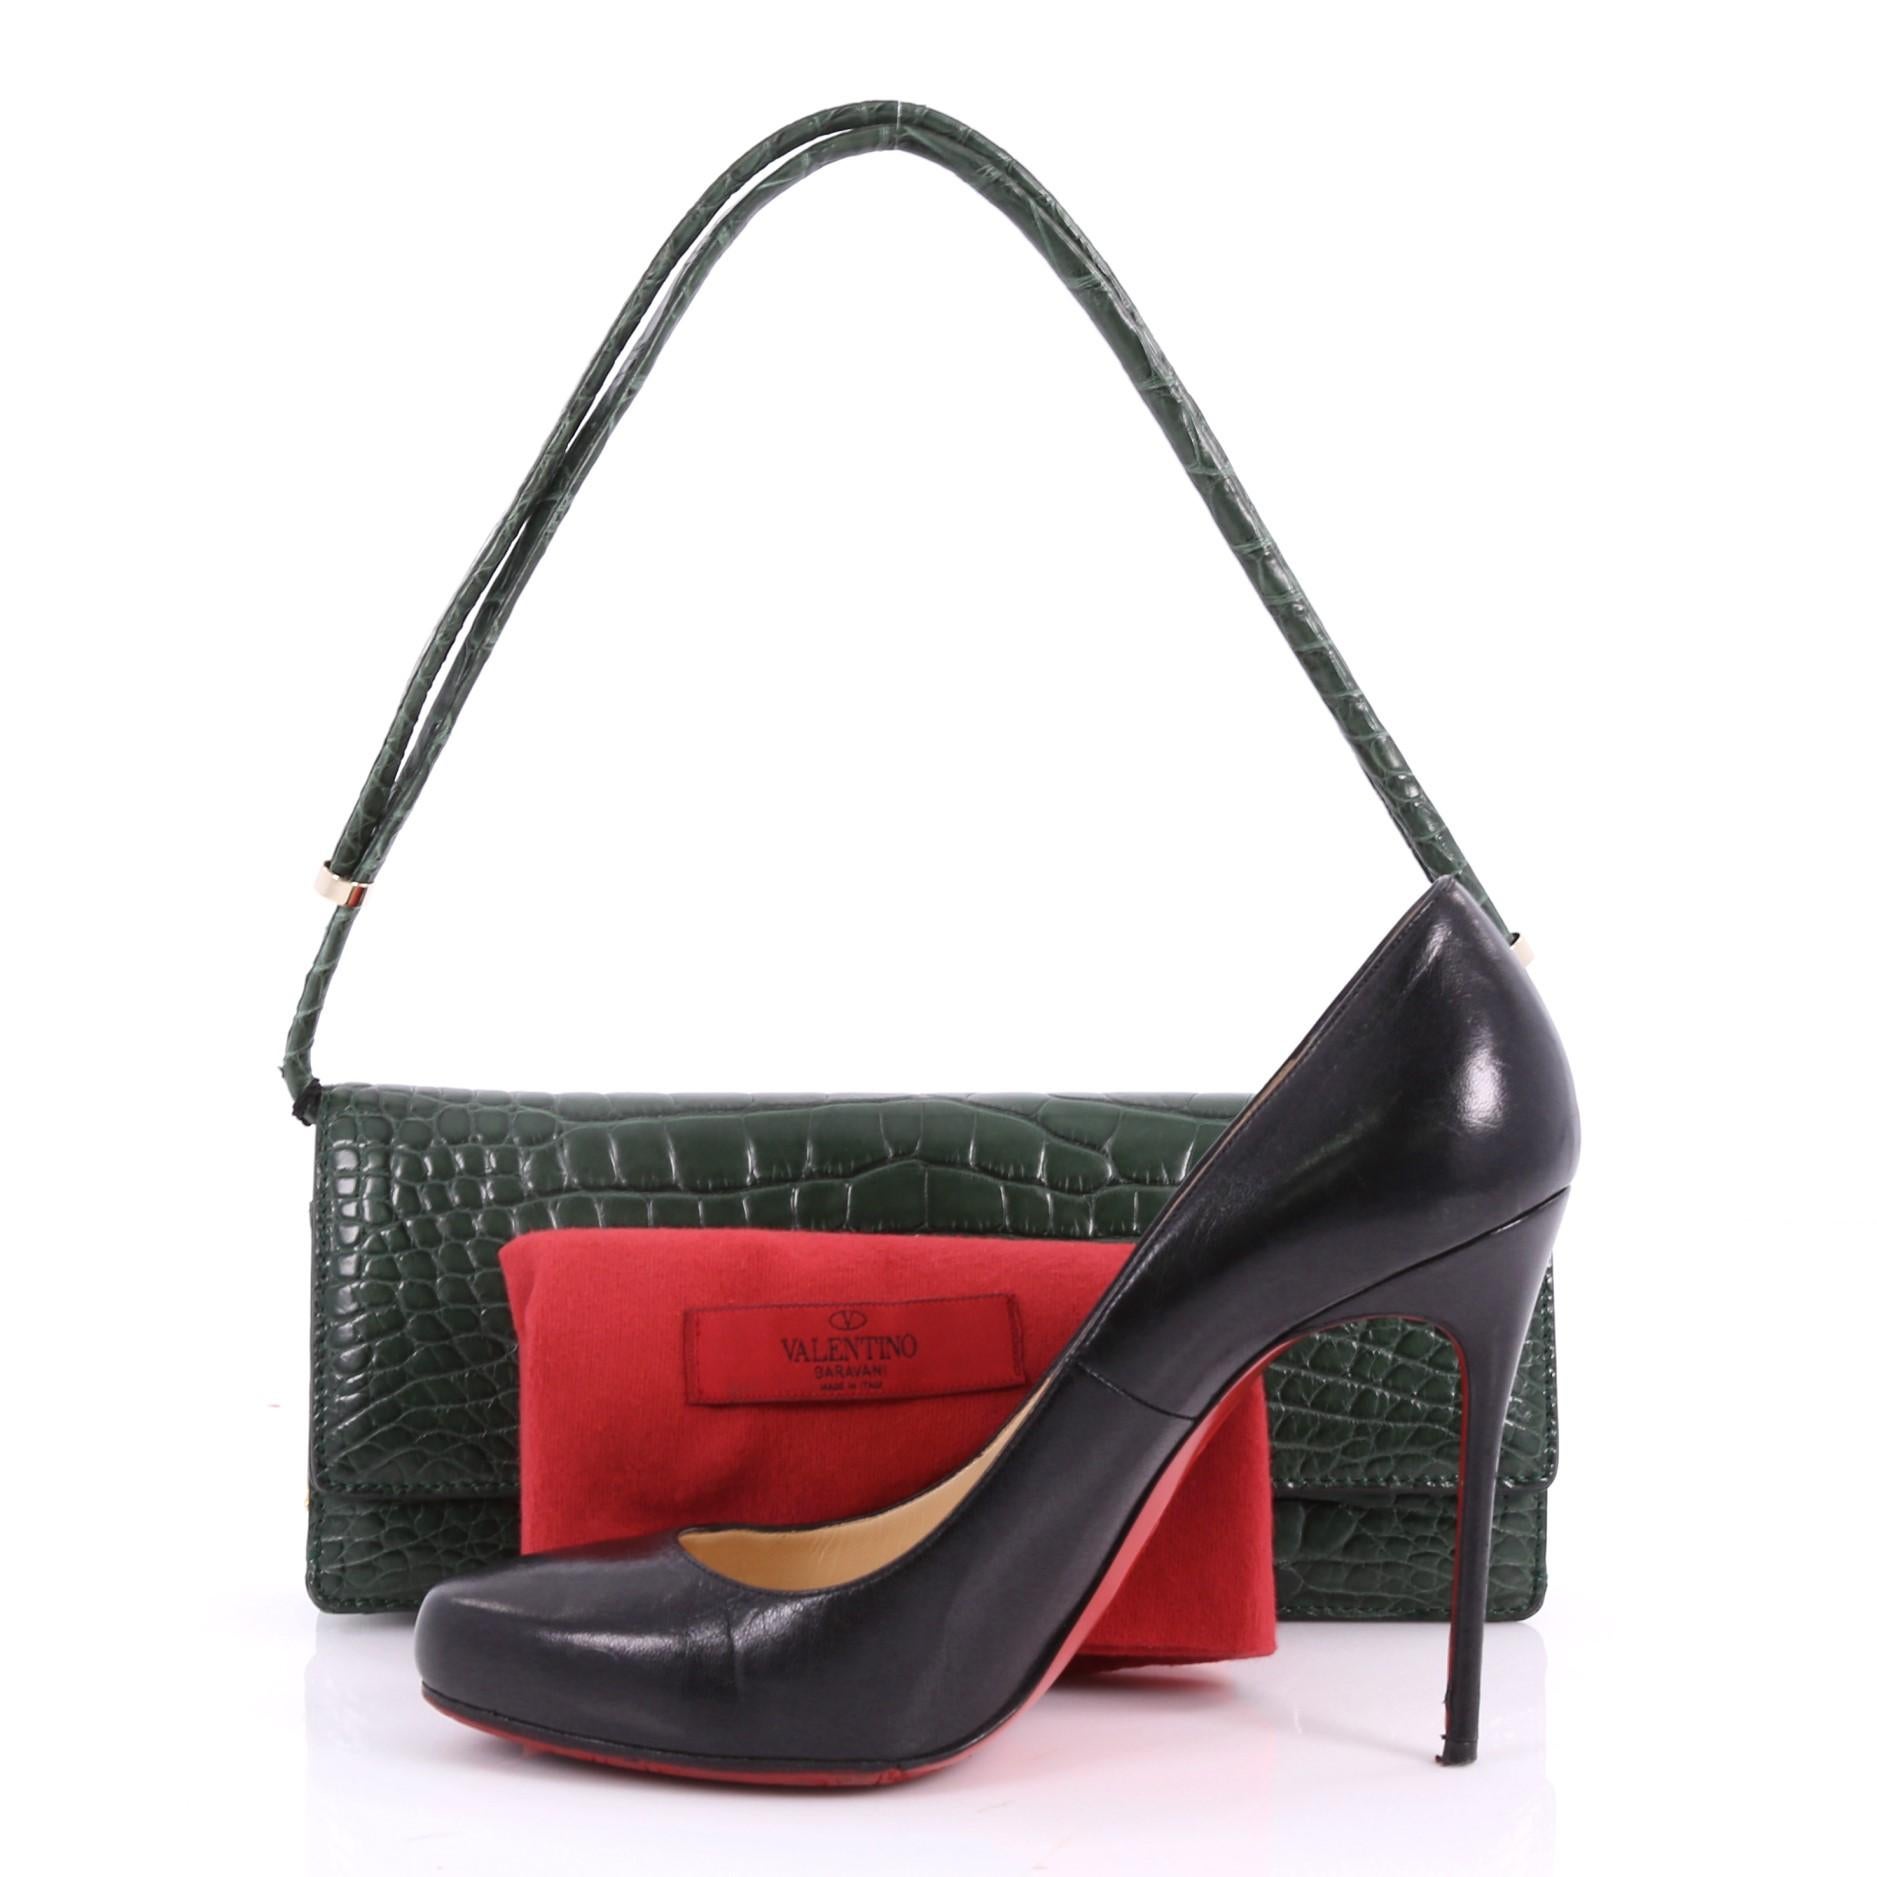 This authentic Valentino Flap Clutch Alligator Long is a sleek and beautiful clutch that will keep you organized. Crafted from genuine green alligator skin, this chic clutch features an alligator skin strap, front flap with snap closure, and